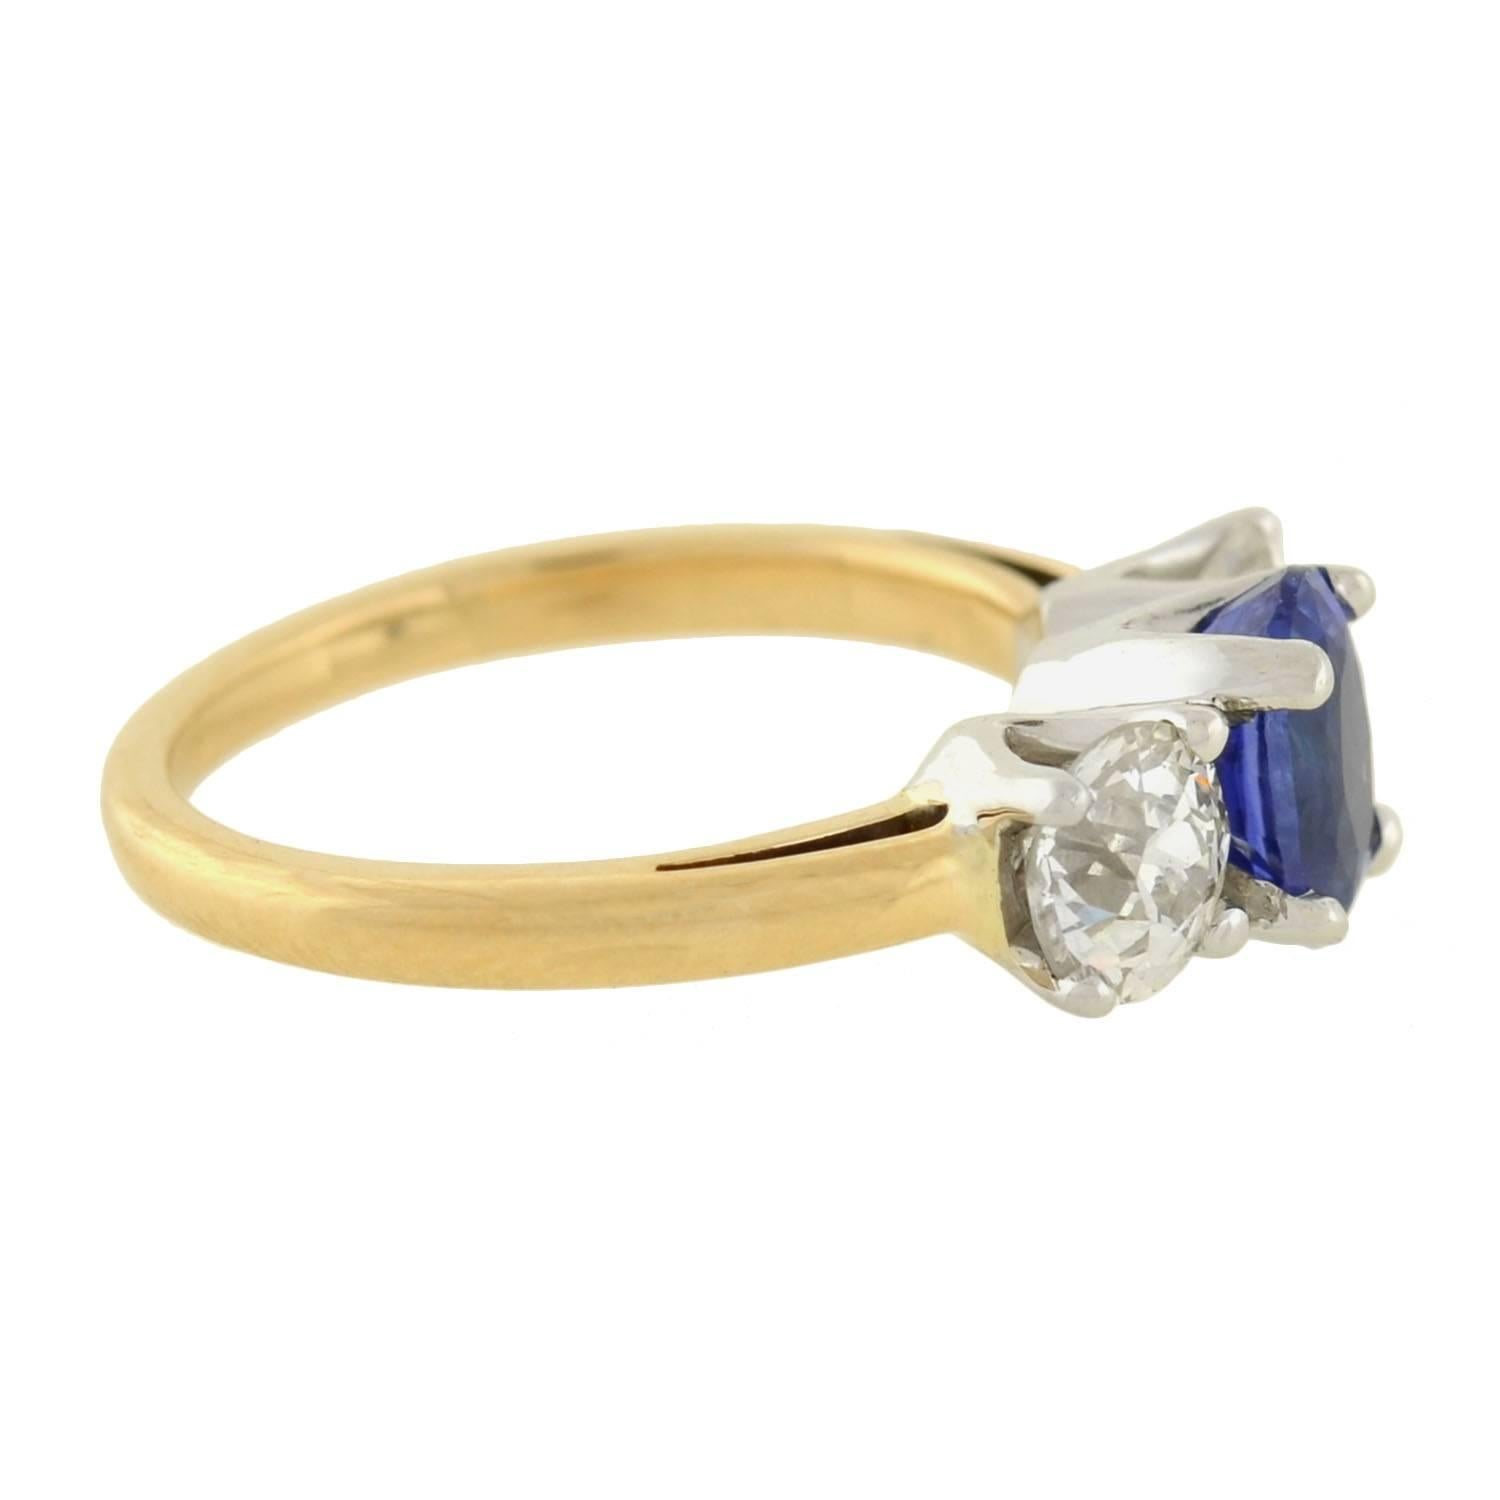 A gorgeous sapphire and diamond trilogy ring from the Art Deco (ca1930s) era! The 18kt mixed metals setting combines a yellow gold band with white prongs for a lovely 2-tone effect. A trio of beautiful stones rest within the prongs, including an